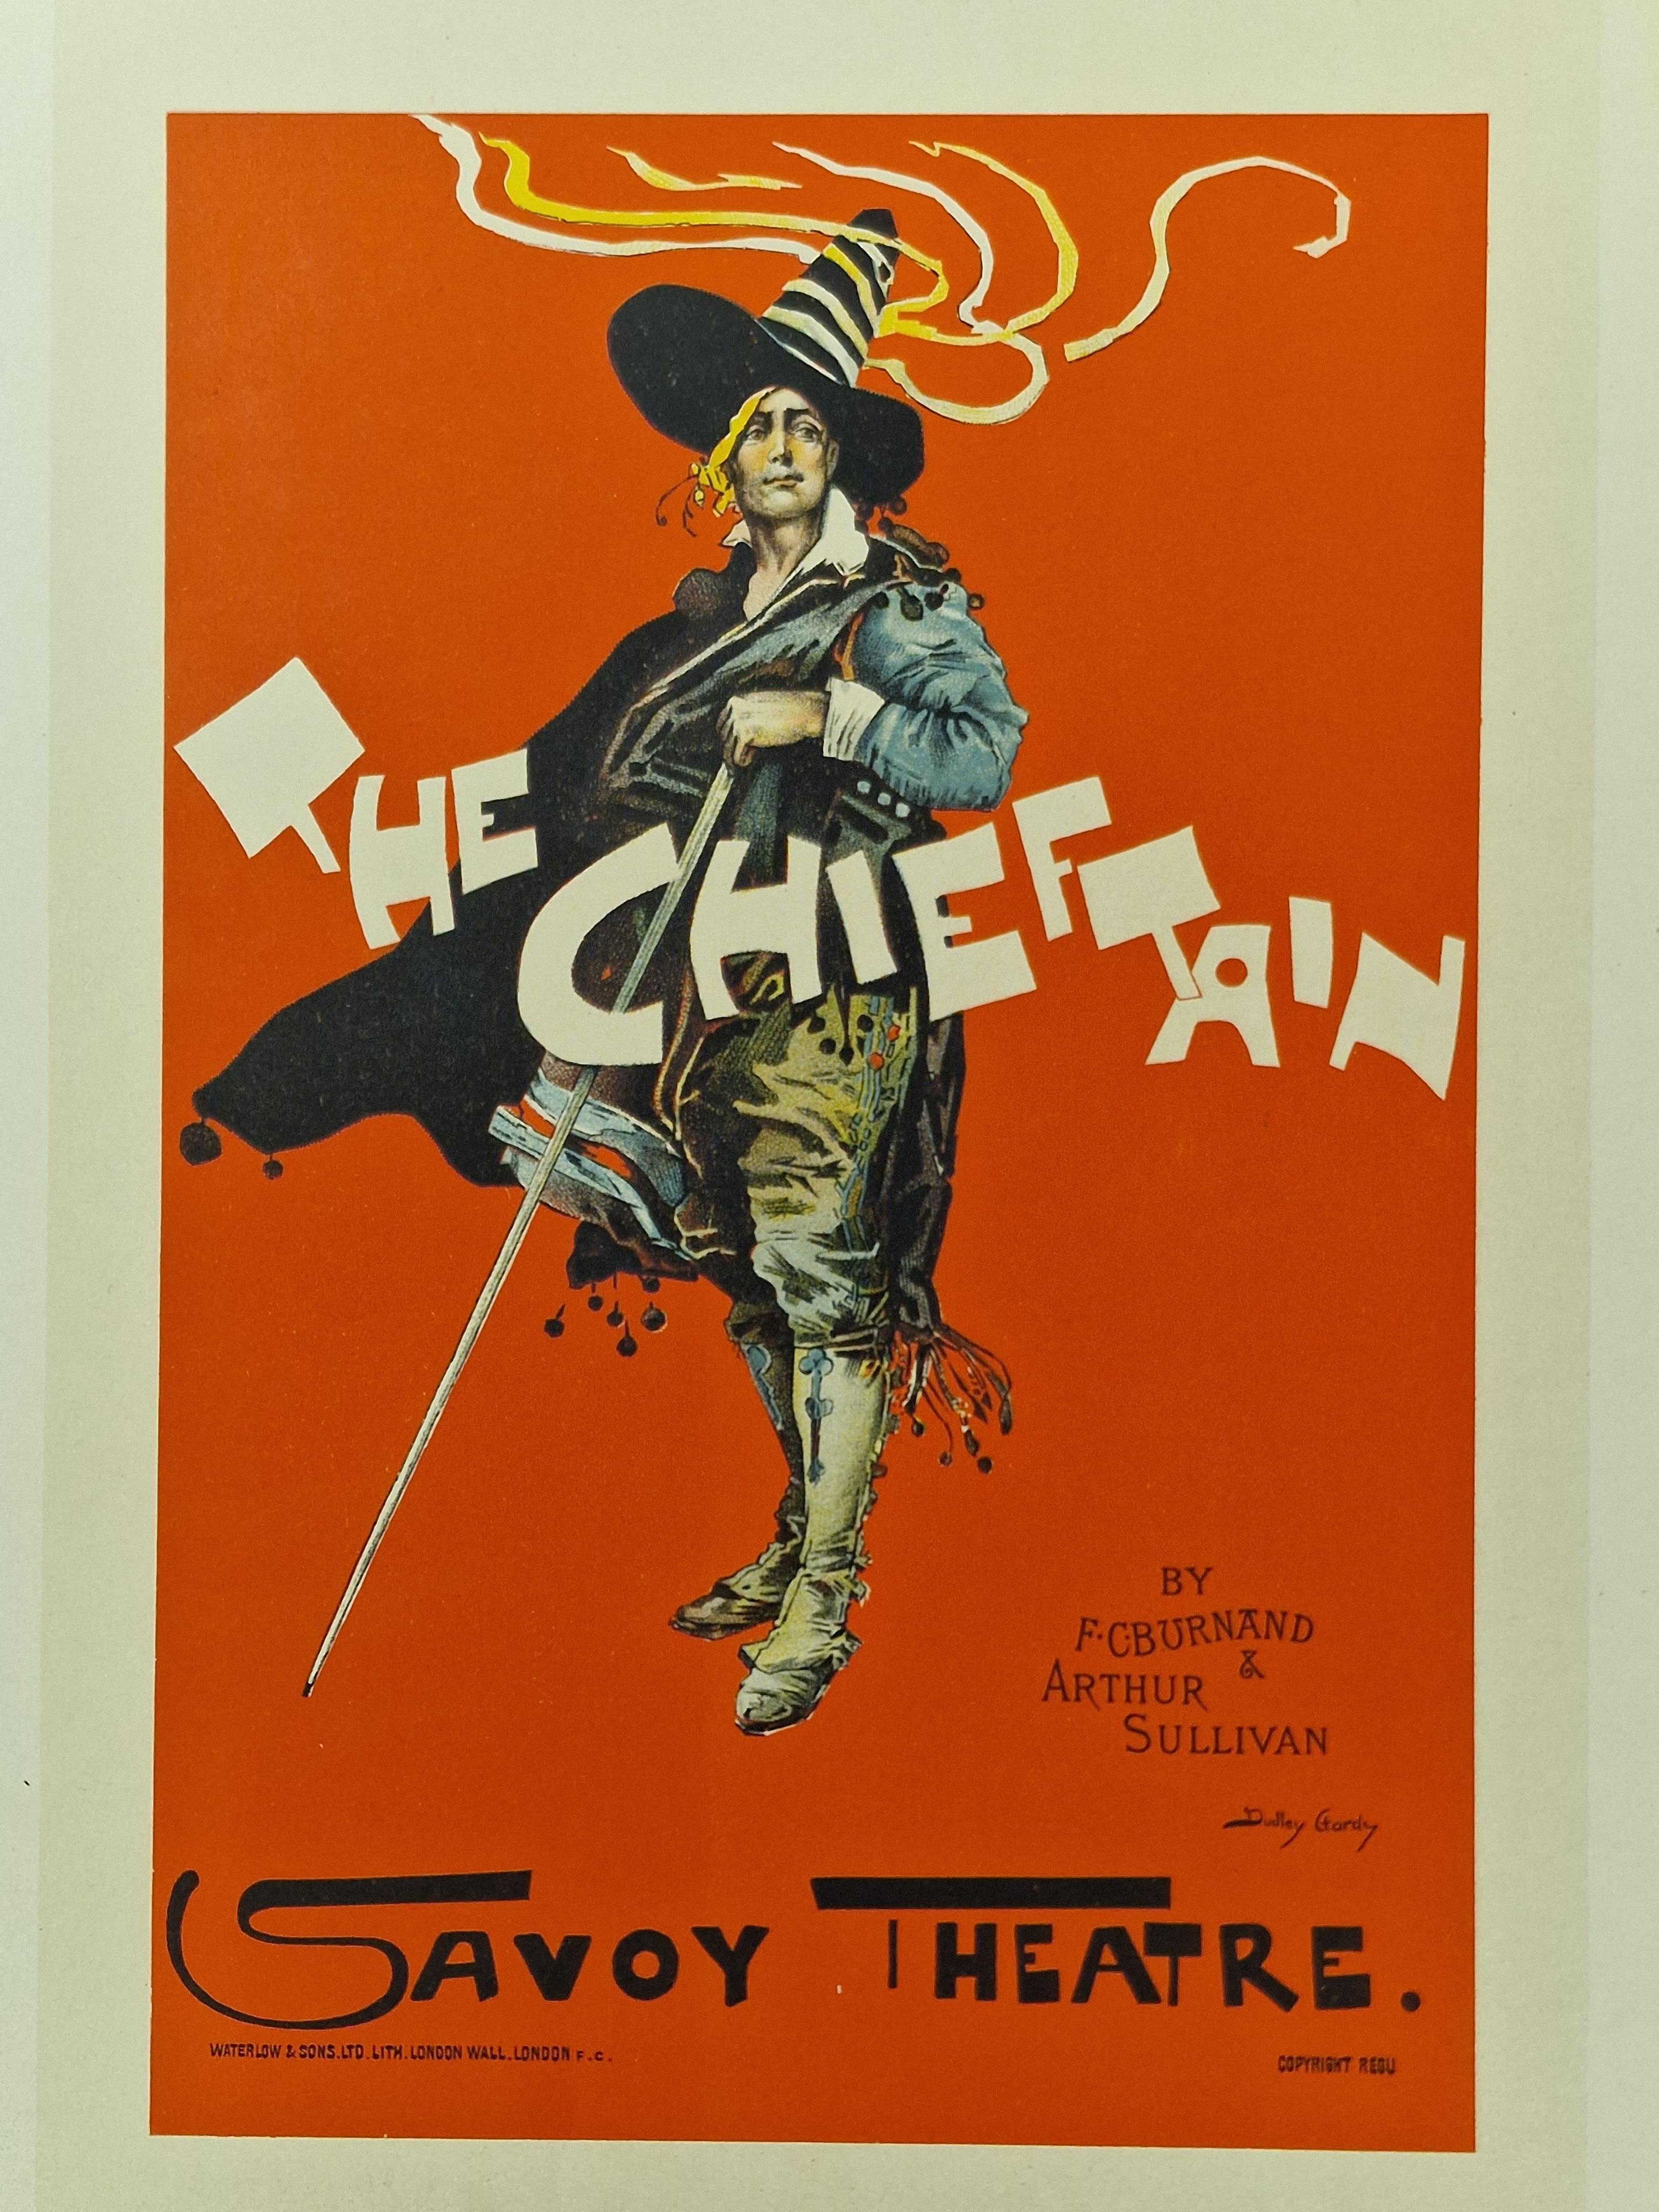 Dudley Hardy Print - The Chieftain